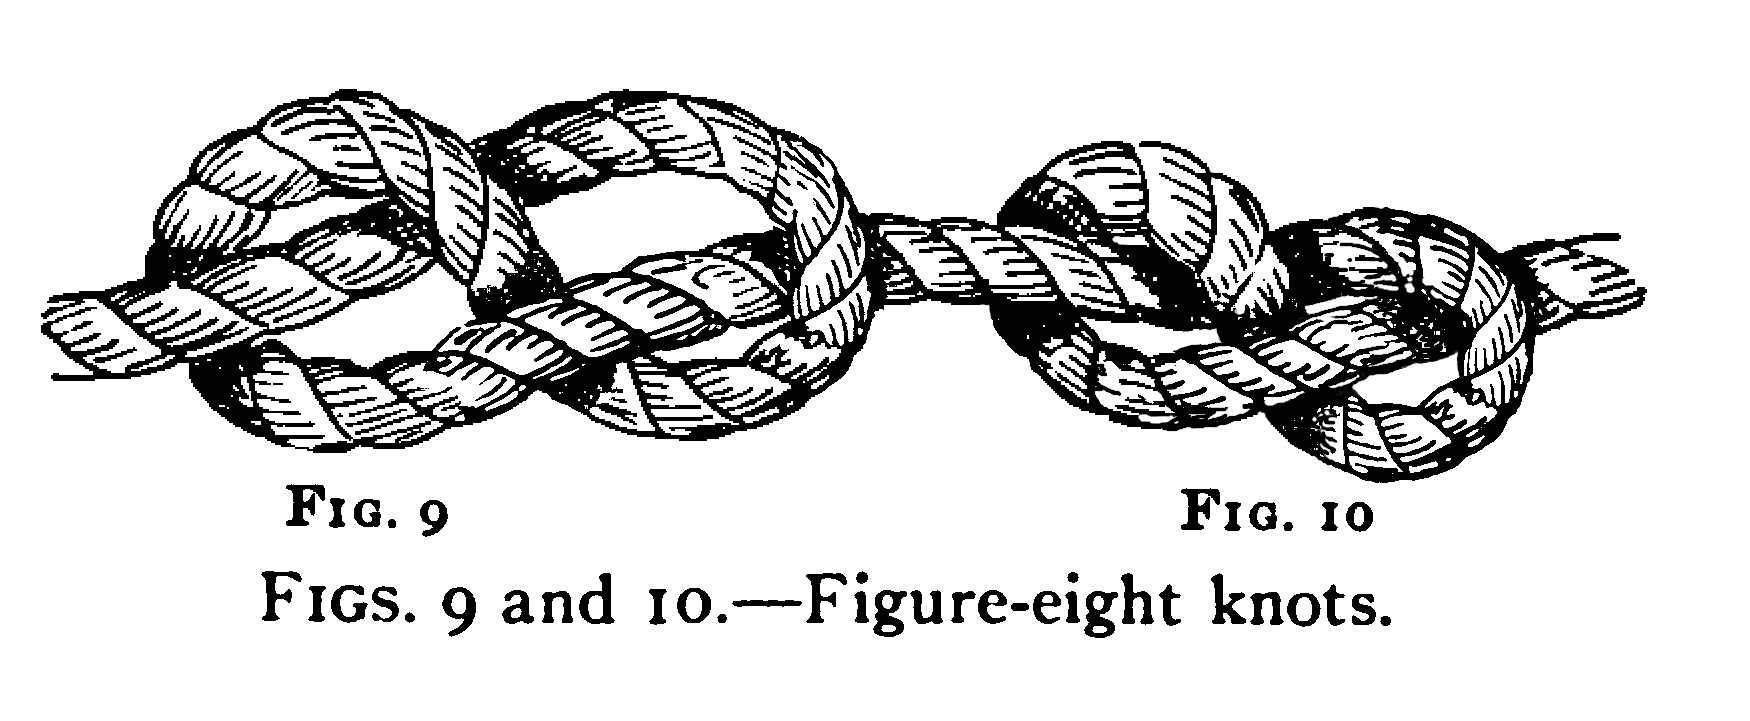 Illustration: FIGS. Corrected fig 9 and 10;Figure-eight knots.